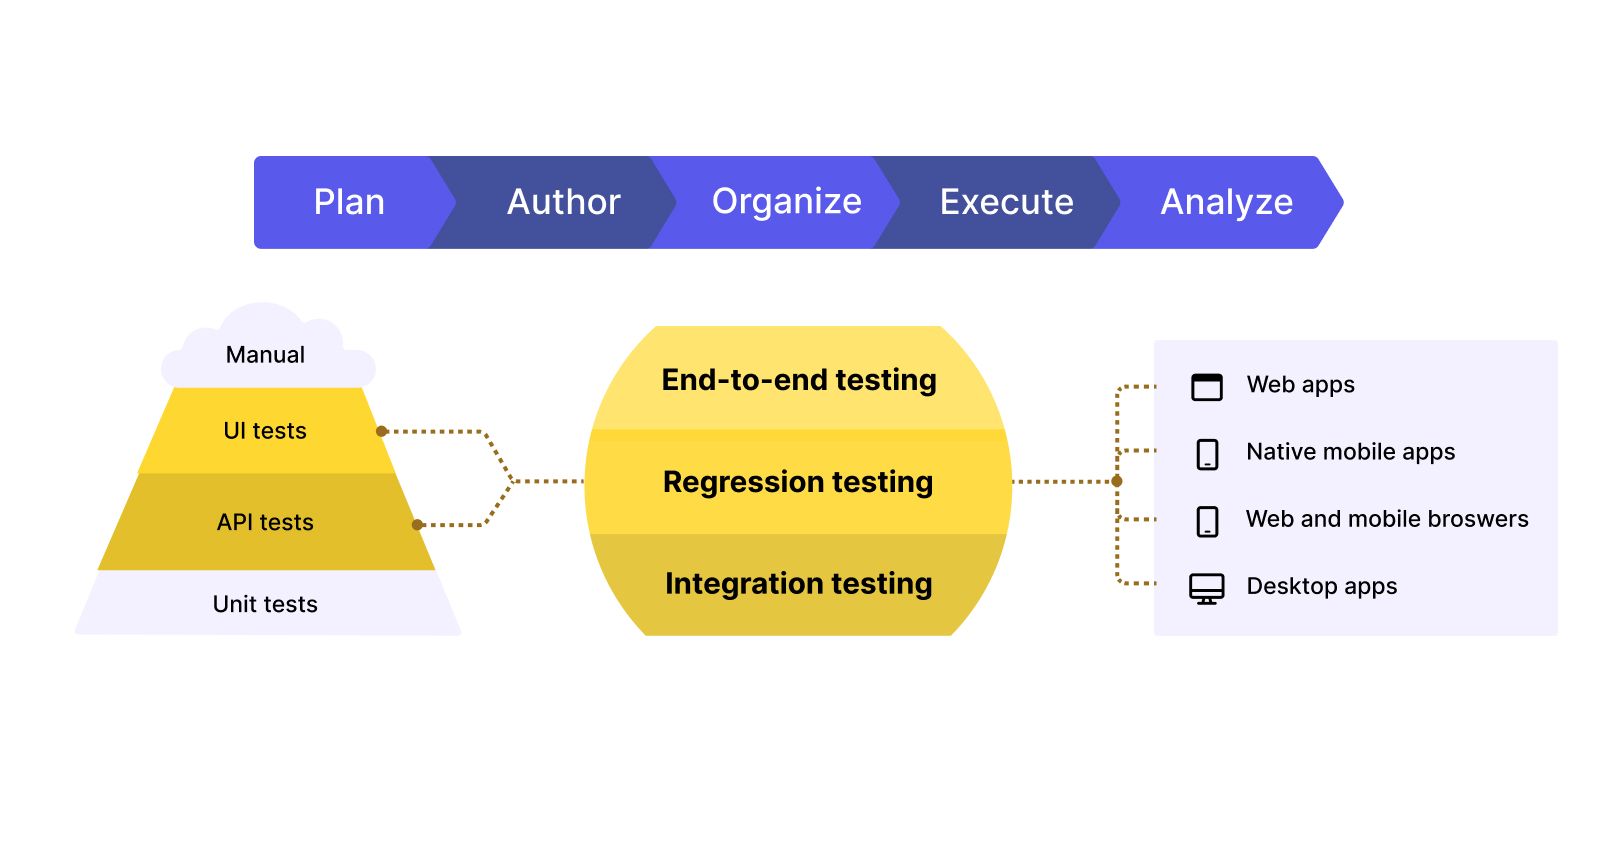 The Katalon Platform's all-in-one automation testing solution